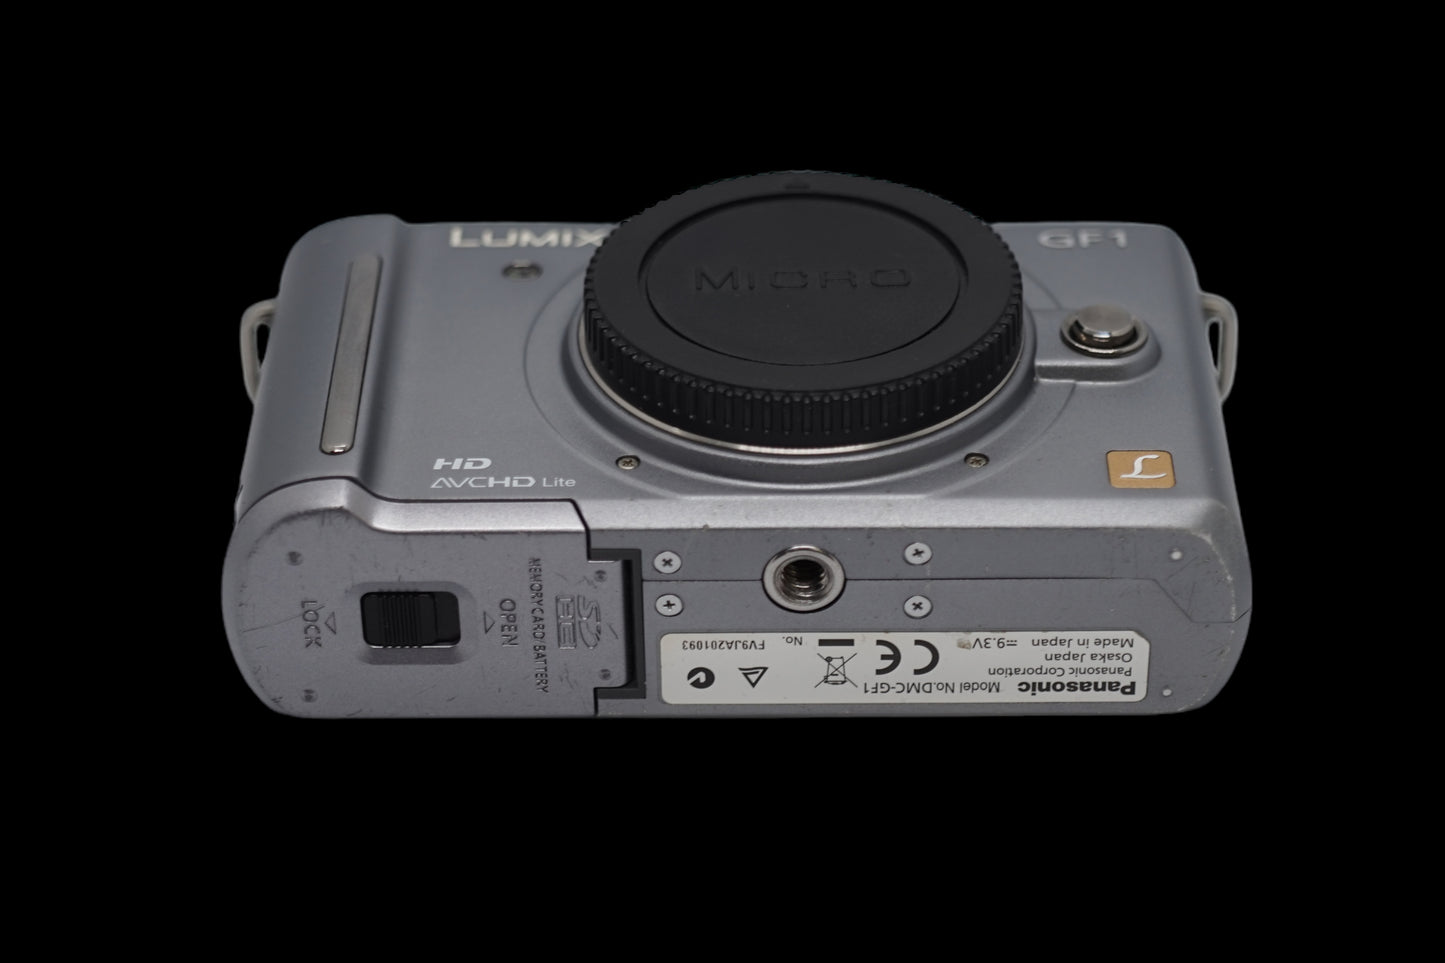 Panasonic GF1 with Double Glass lens and adaptor